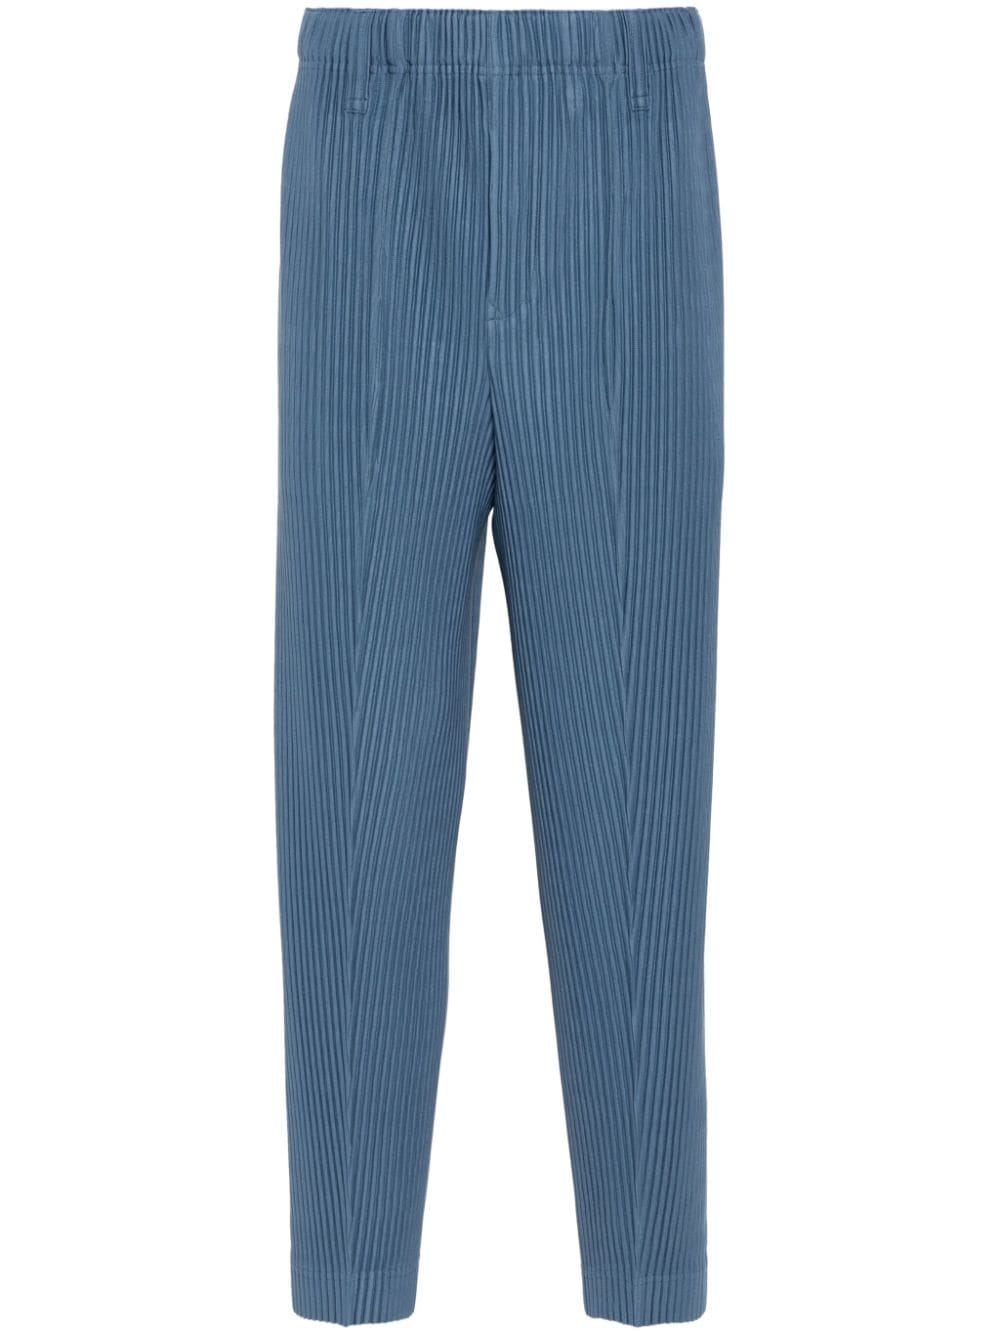 Homme Plissé Issey Miyake Compleat pleated trousers Blauw